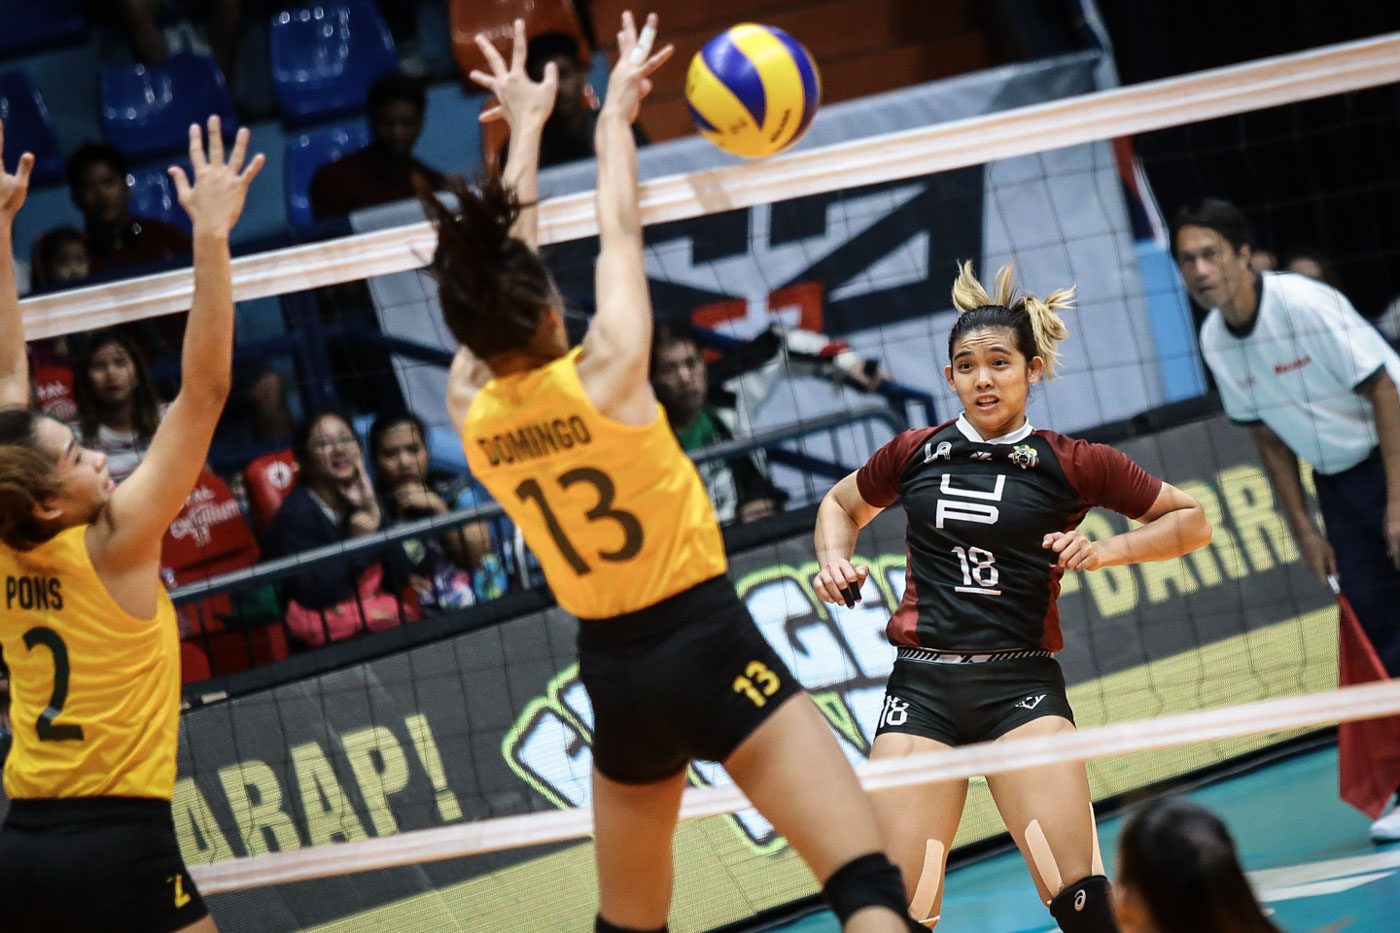 UP, FEU dispute early lead as Ateneo aims to bounce back vs UST